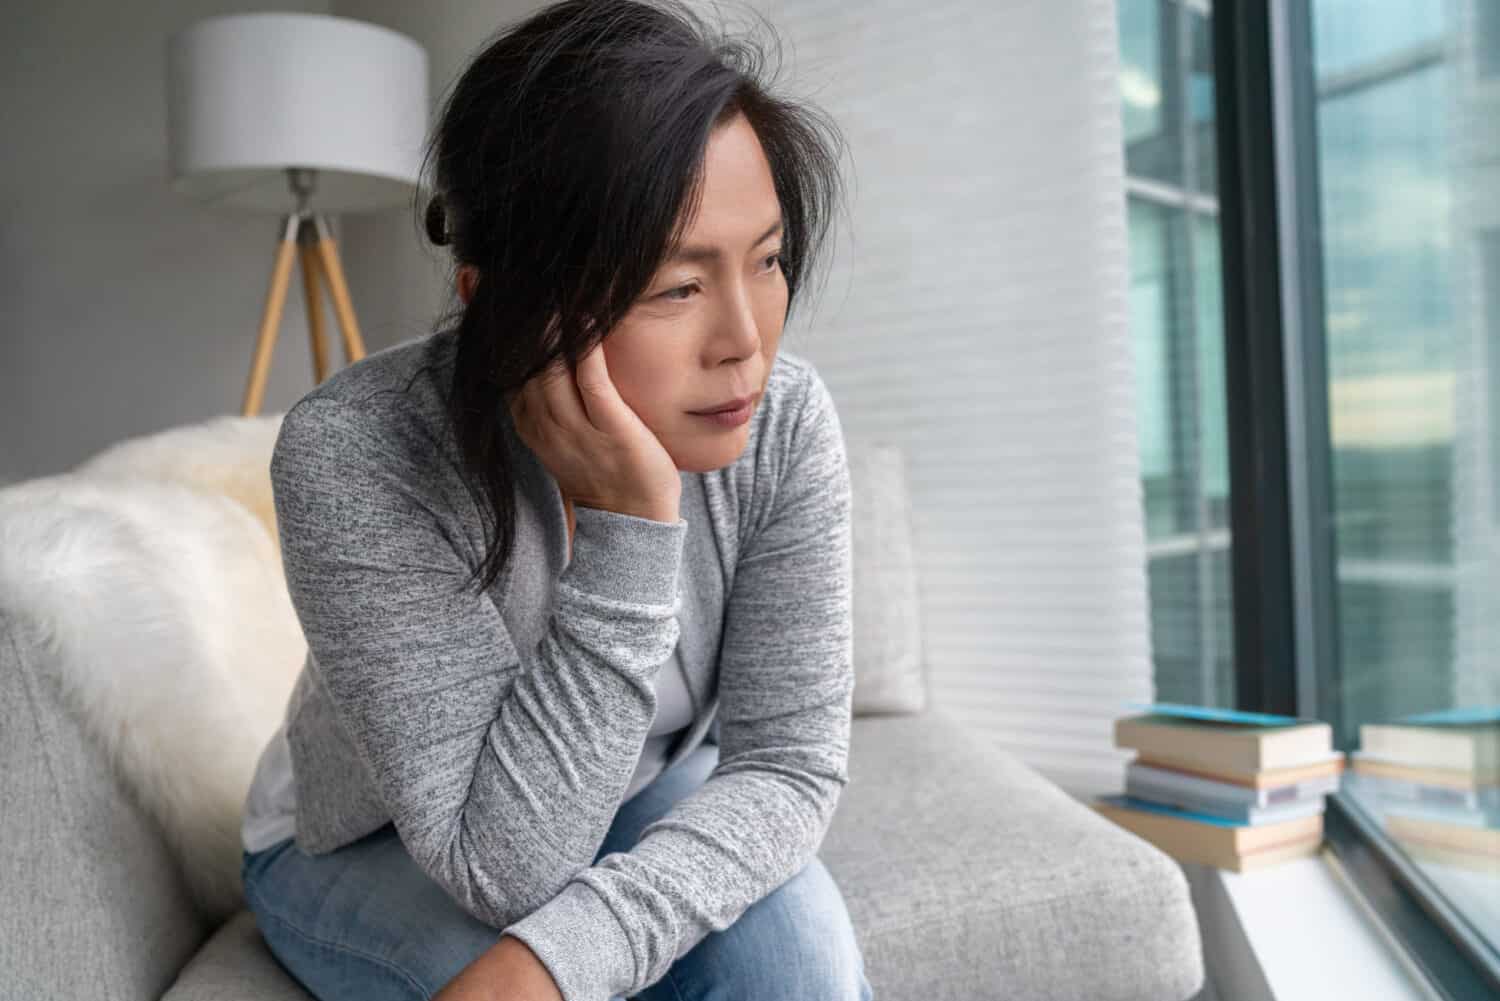 Woman wearing a hearing aid sits on the couch looking frustrated and about to call a hearing aid specialist for assistence with her premium hearing aid